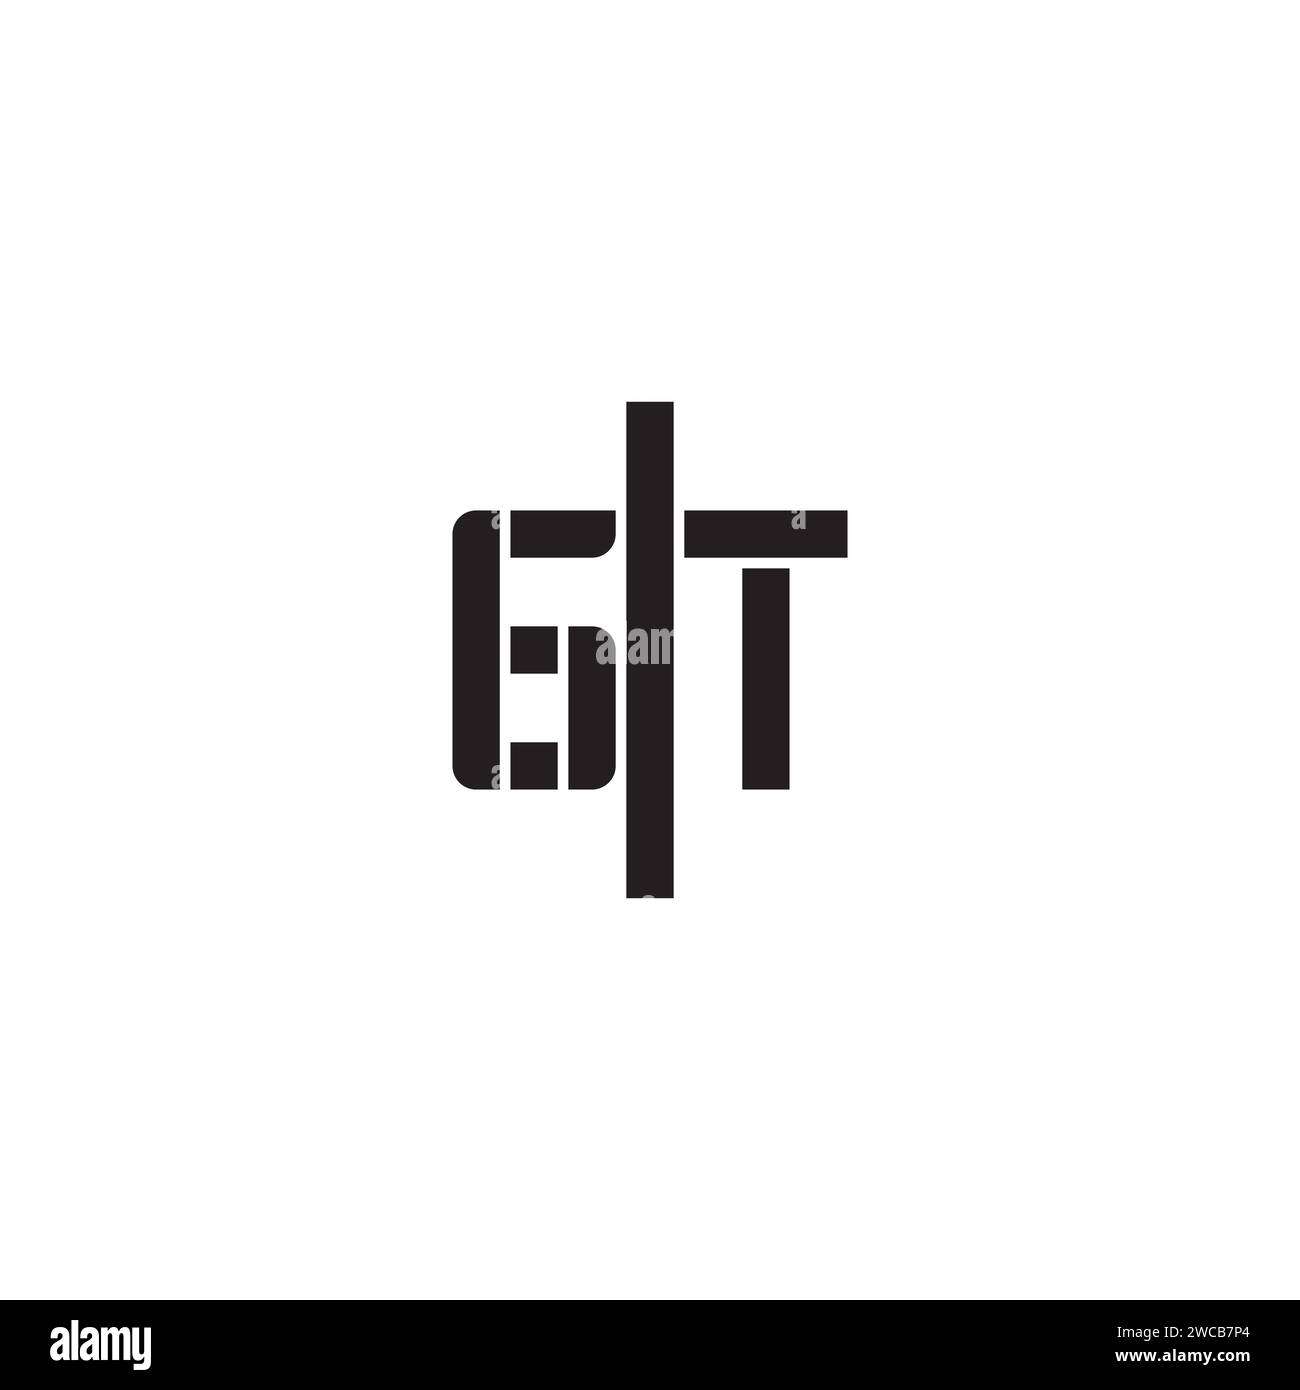 GT geometric bold concept in high quality professional design that will print well across any print media Stock Vector